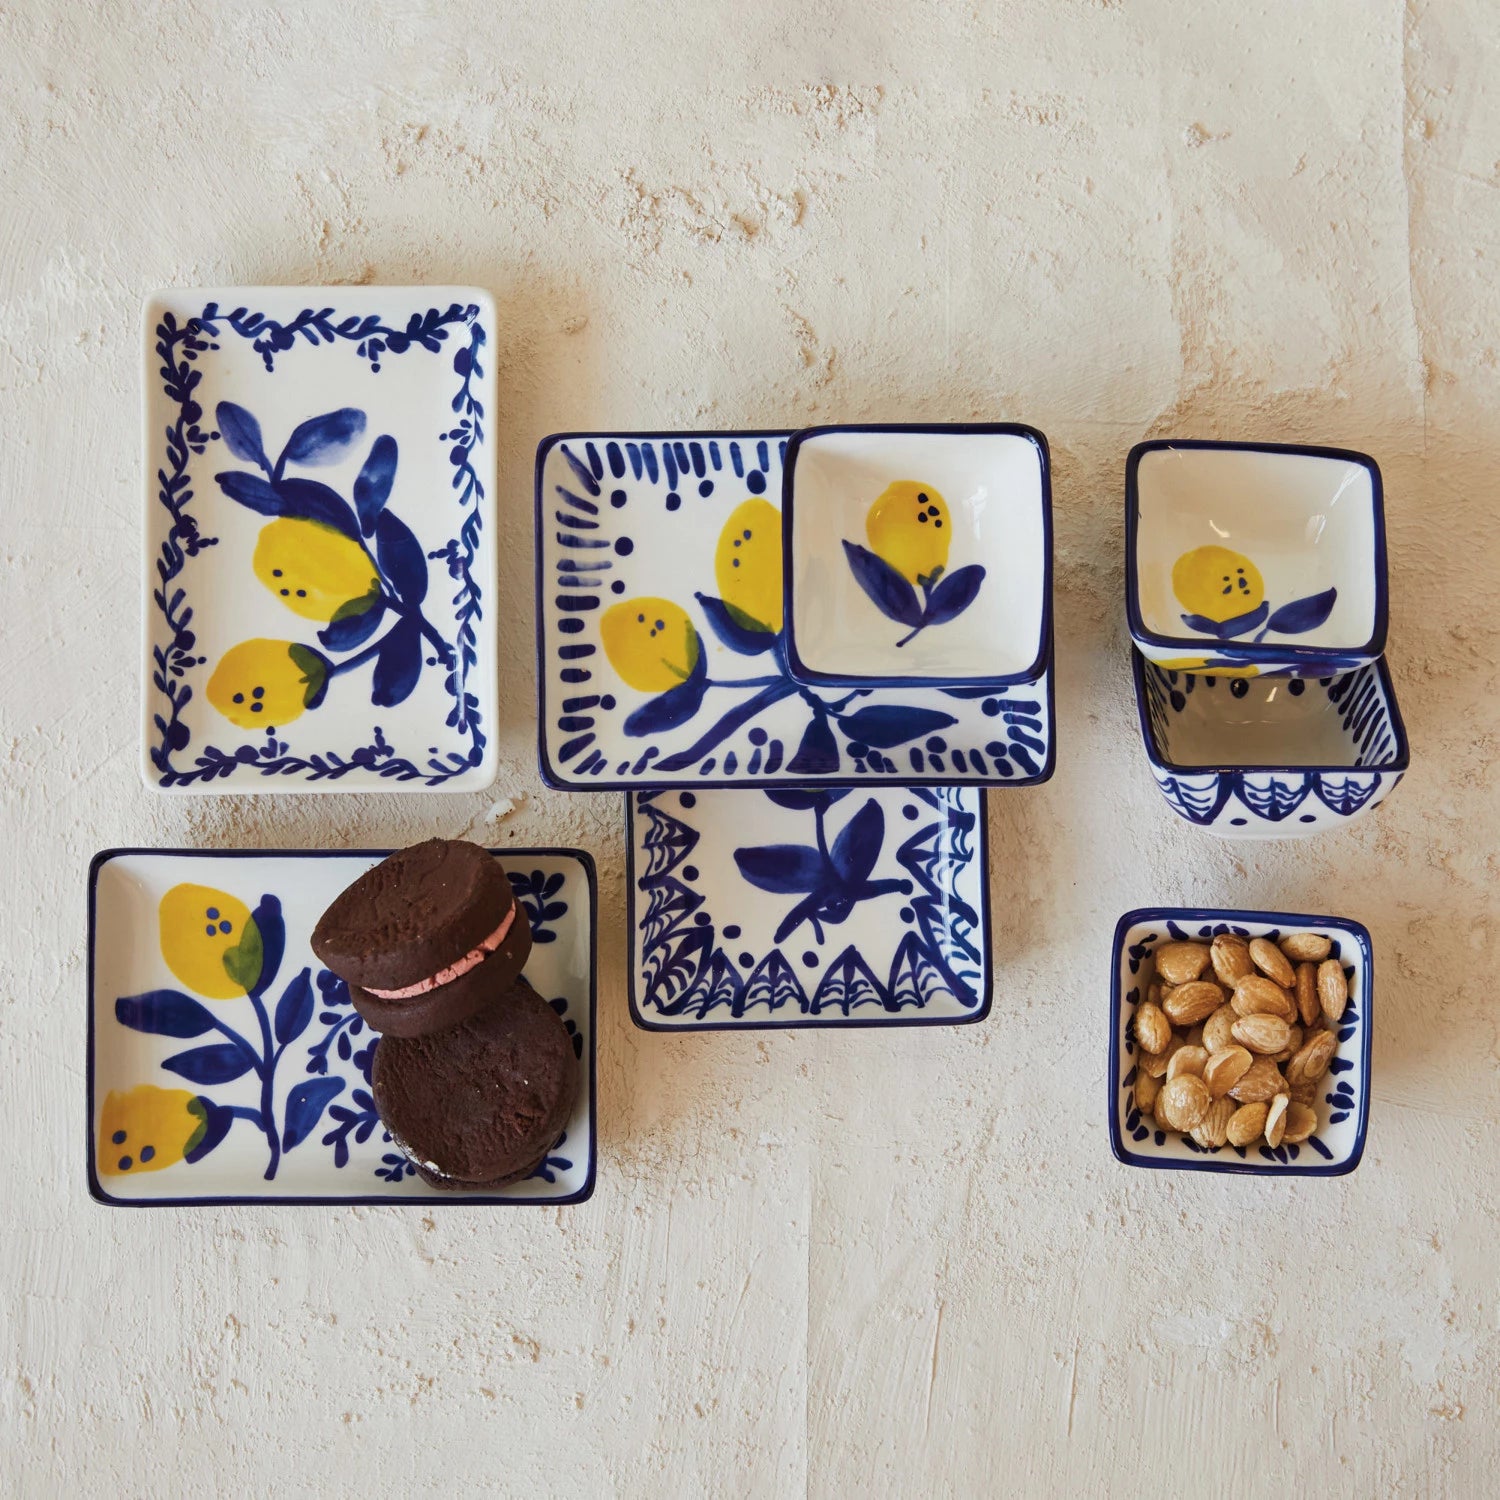 assorted blue and white dishes with lemon design arranged on a plaster surface, on eis filled with nuts, another has cookies on it.